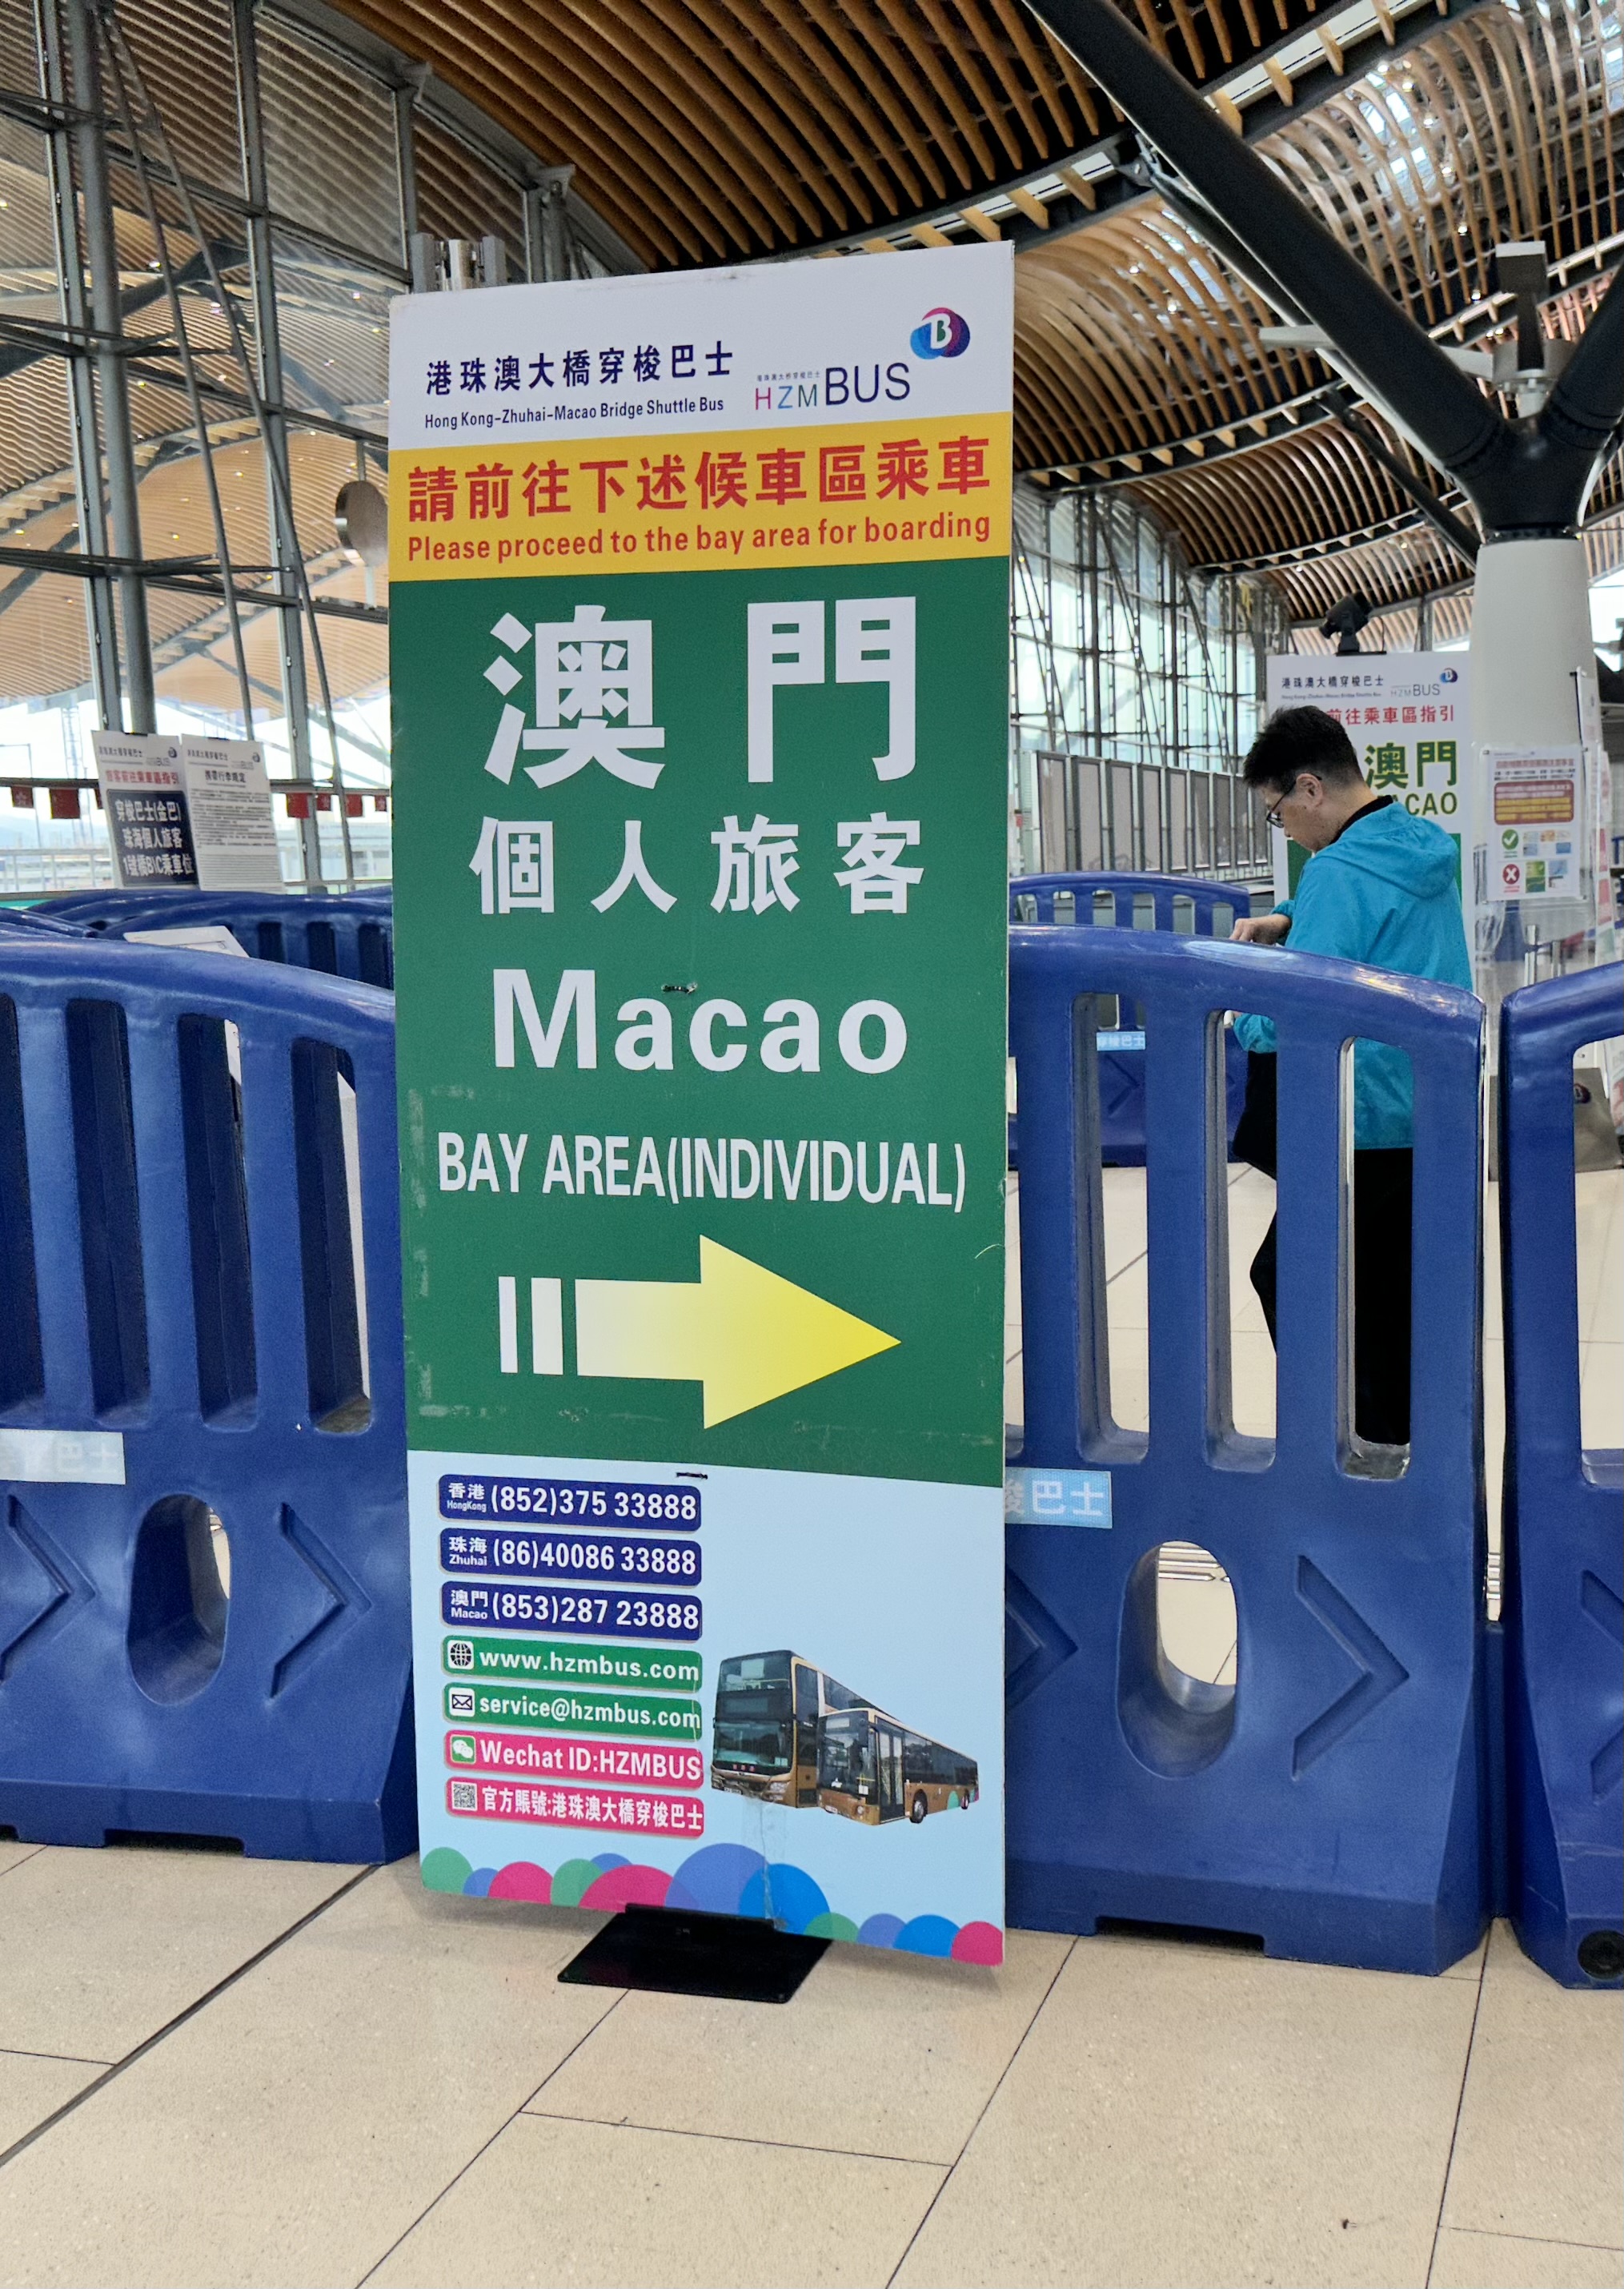 how to go to macau by bus